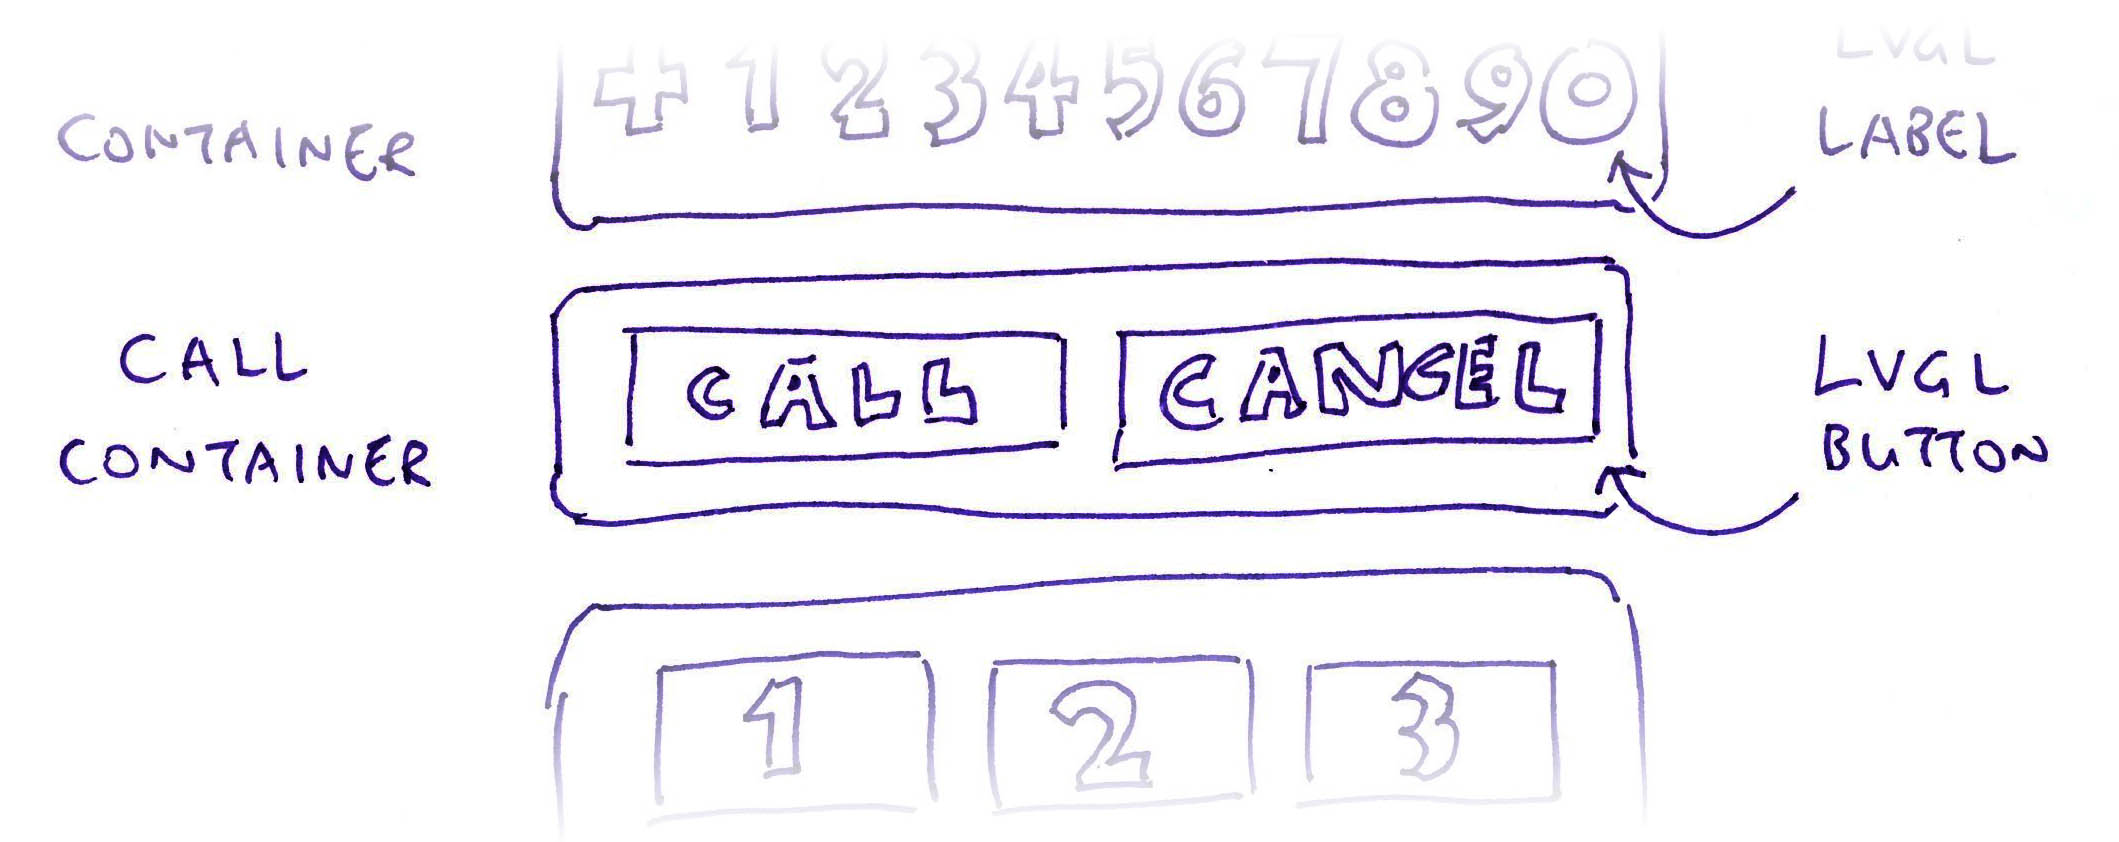 Call and Cancel Buttons